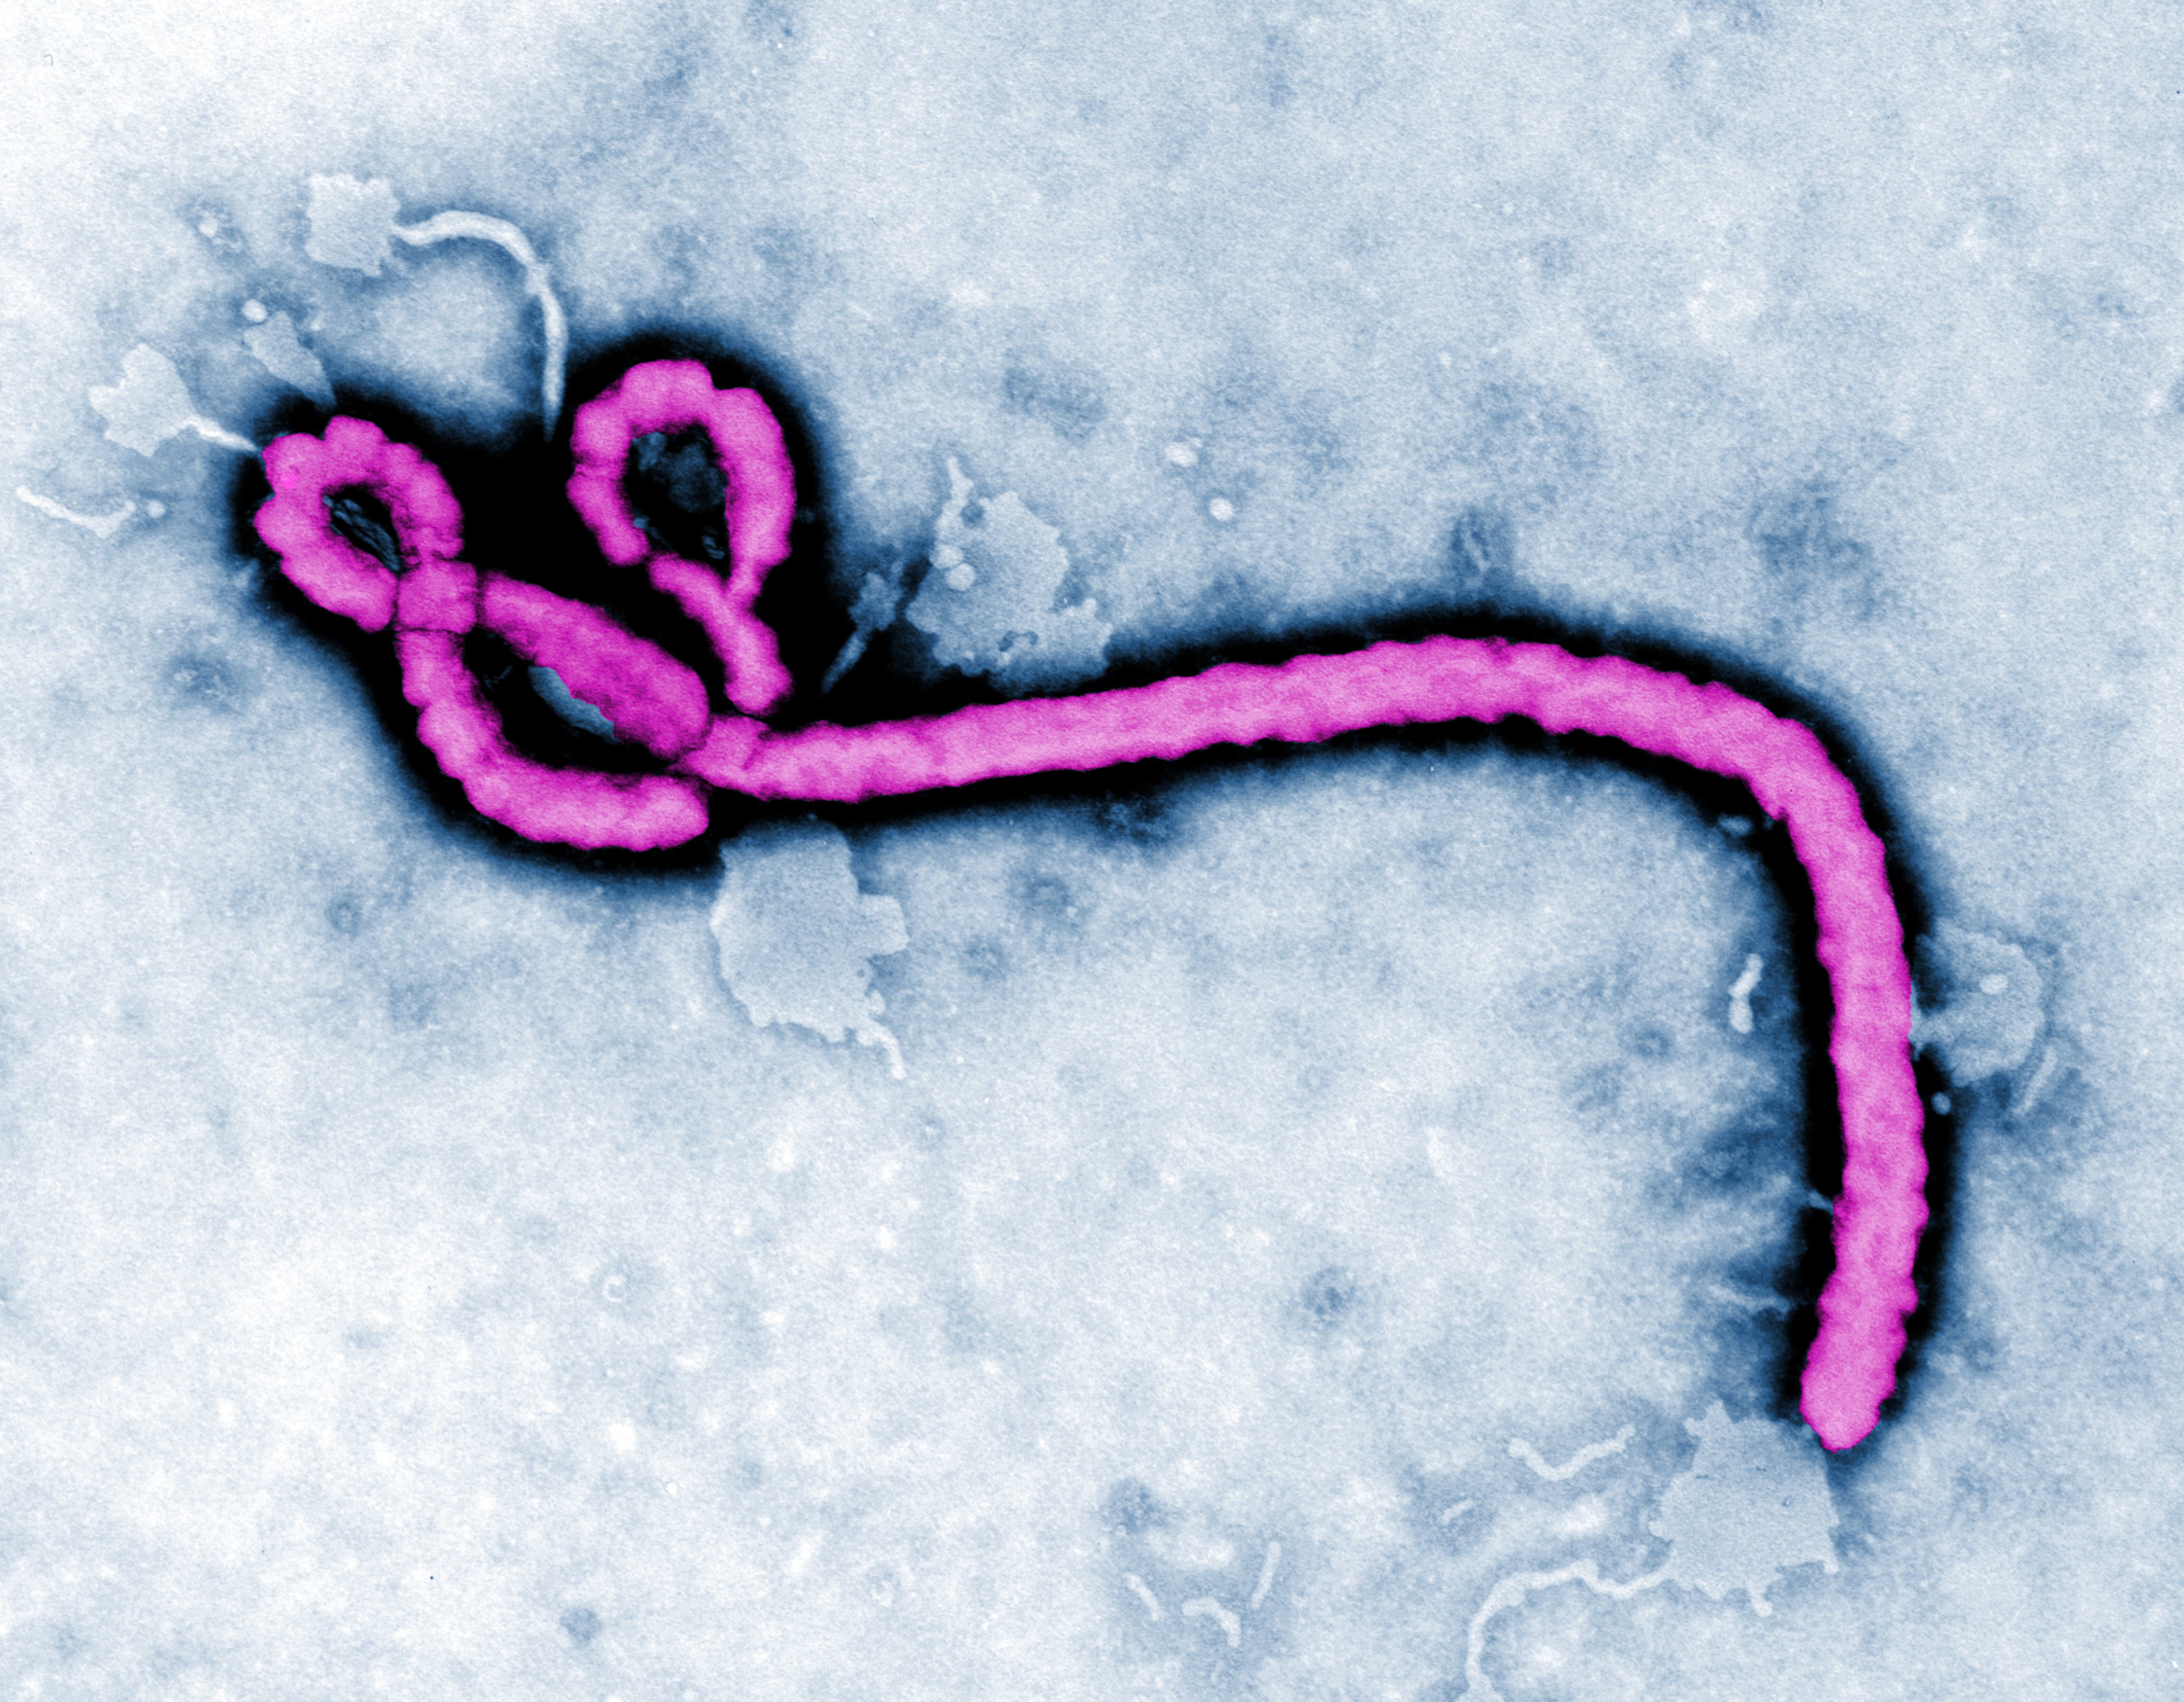 Colorized transmission electron micrograph (TEM) of the Ebola virus.